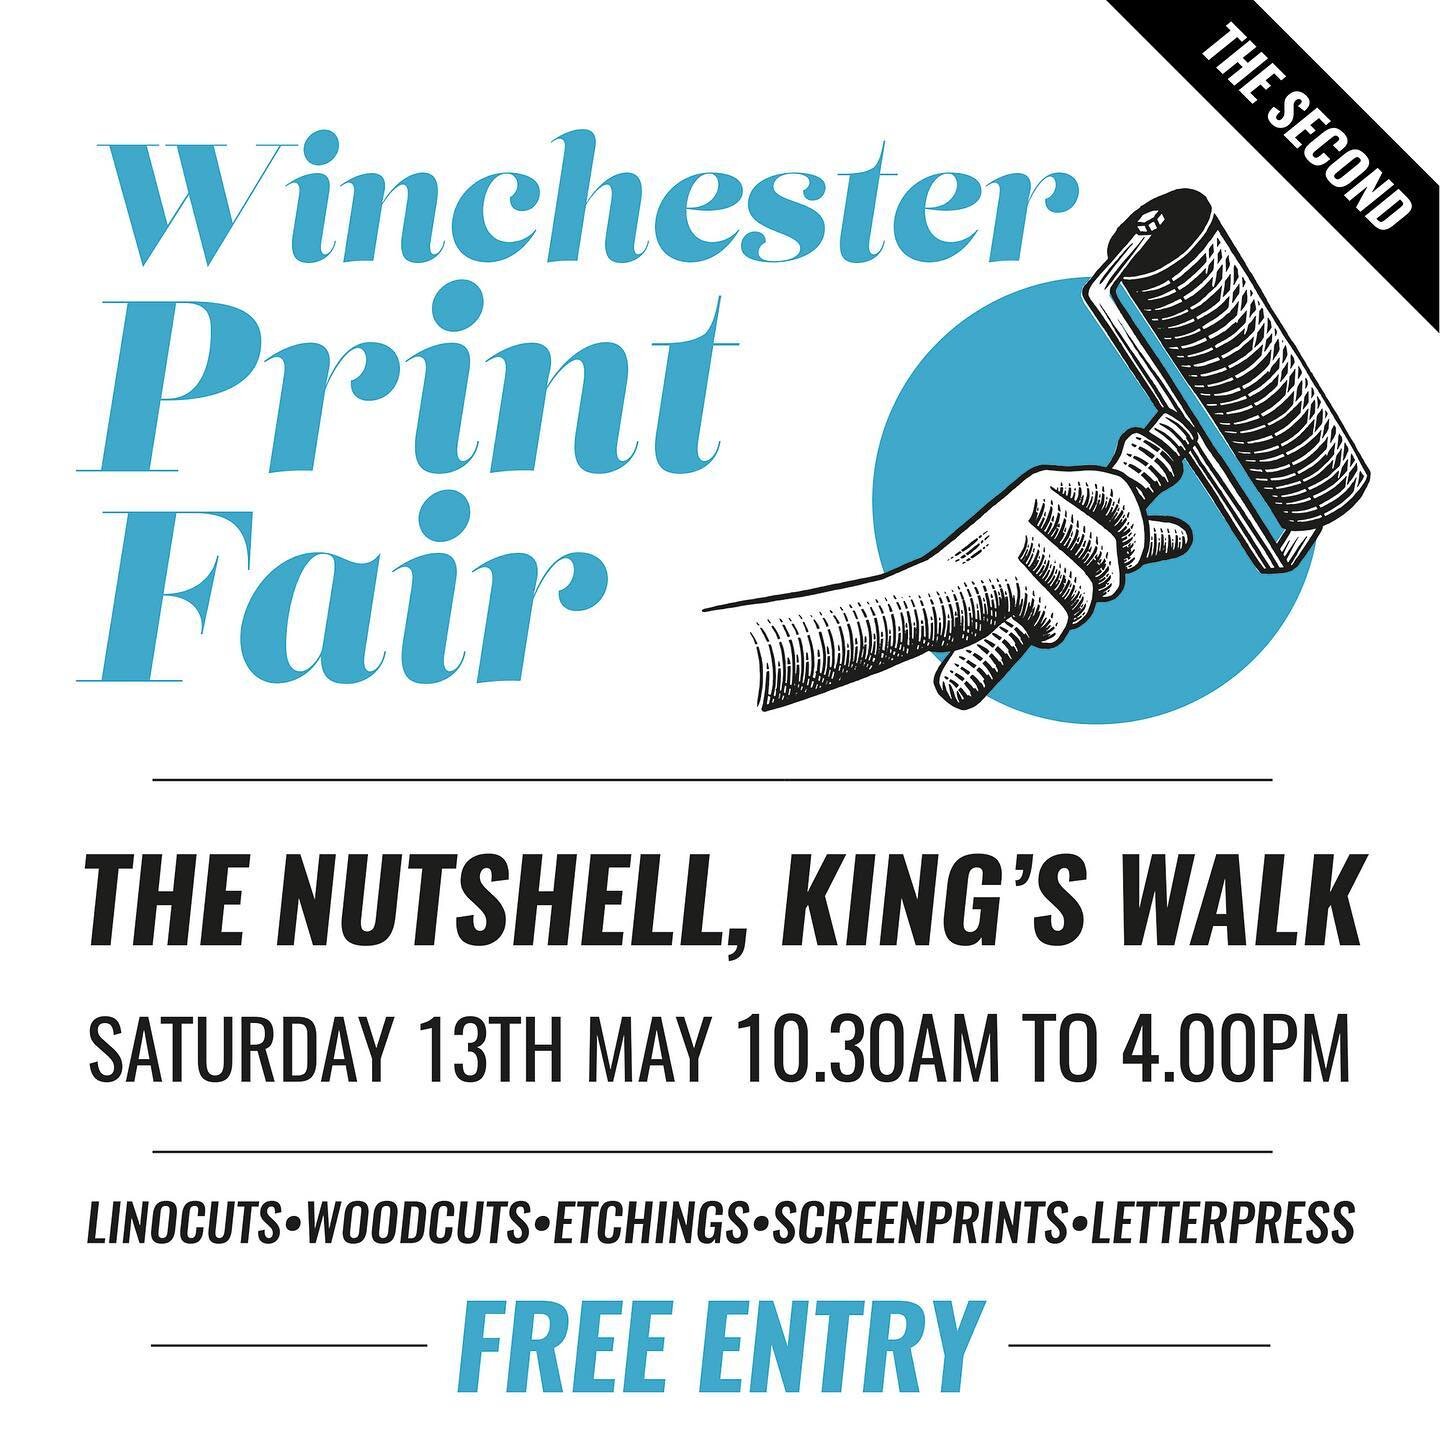 Just over 6 weeks away (need to get printing!!)&hellip;very excited to be taking part in this brilliant Print Fair again! Loads of different styles of prints for sale, and such a great opportunity to look at original artwork in person and chat to the